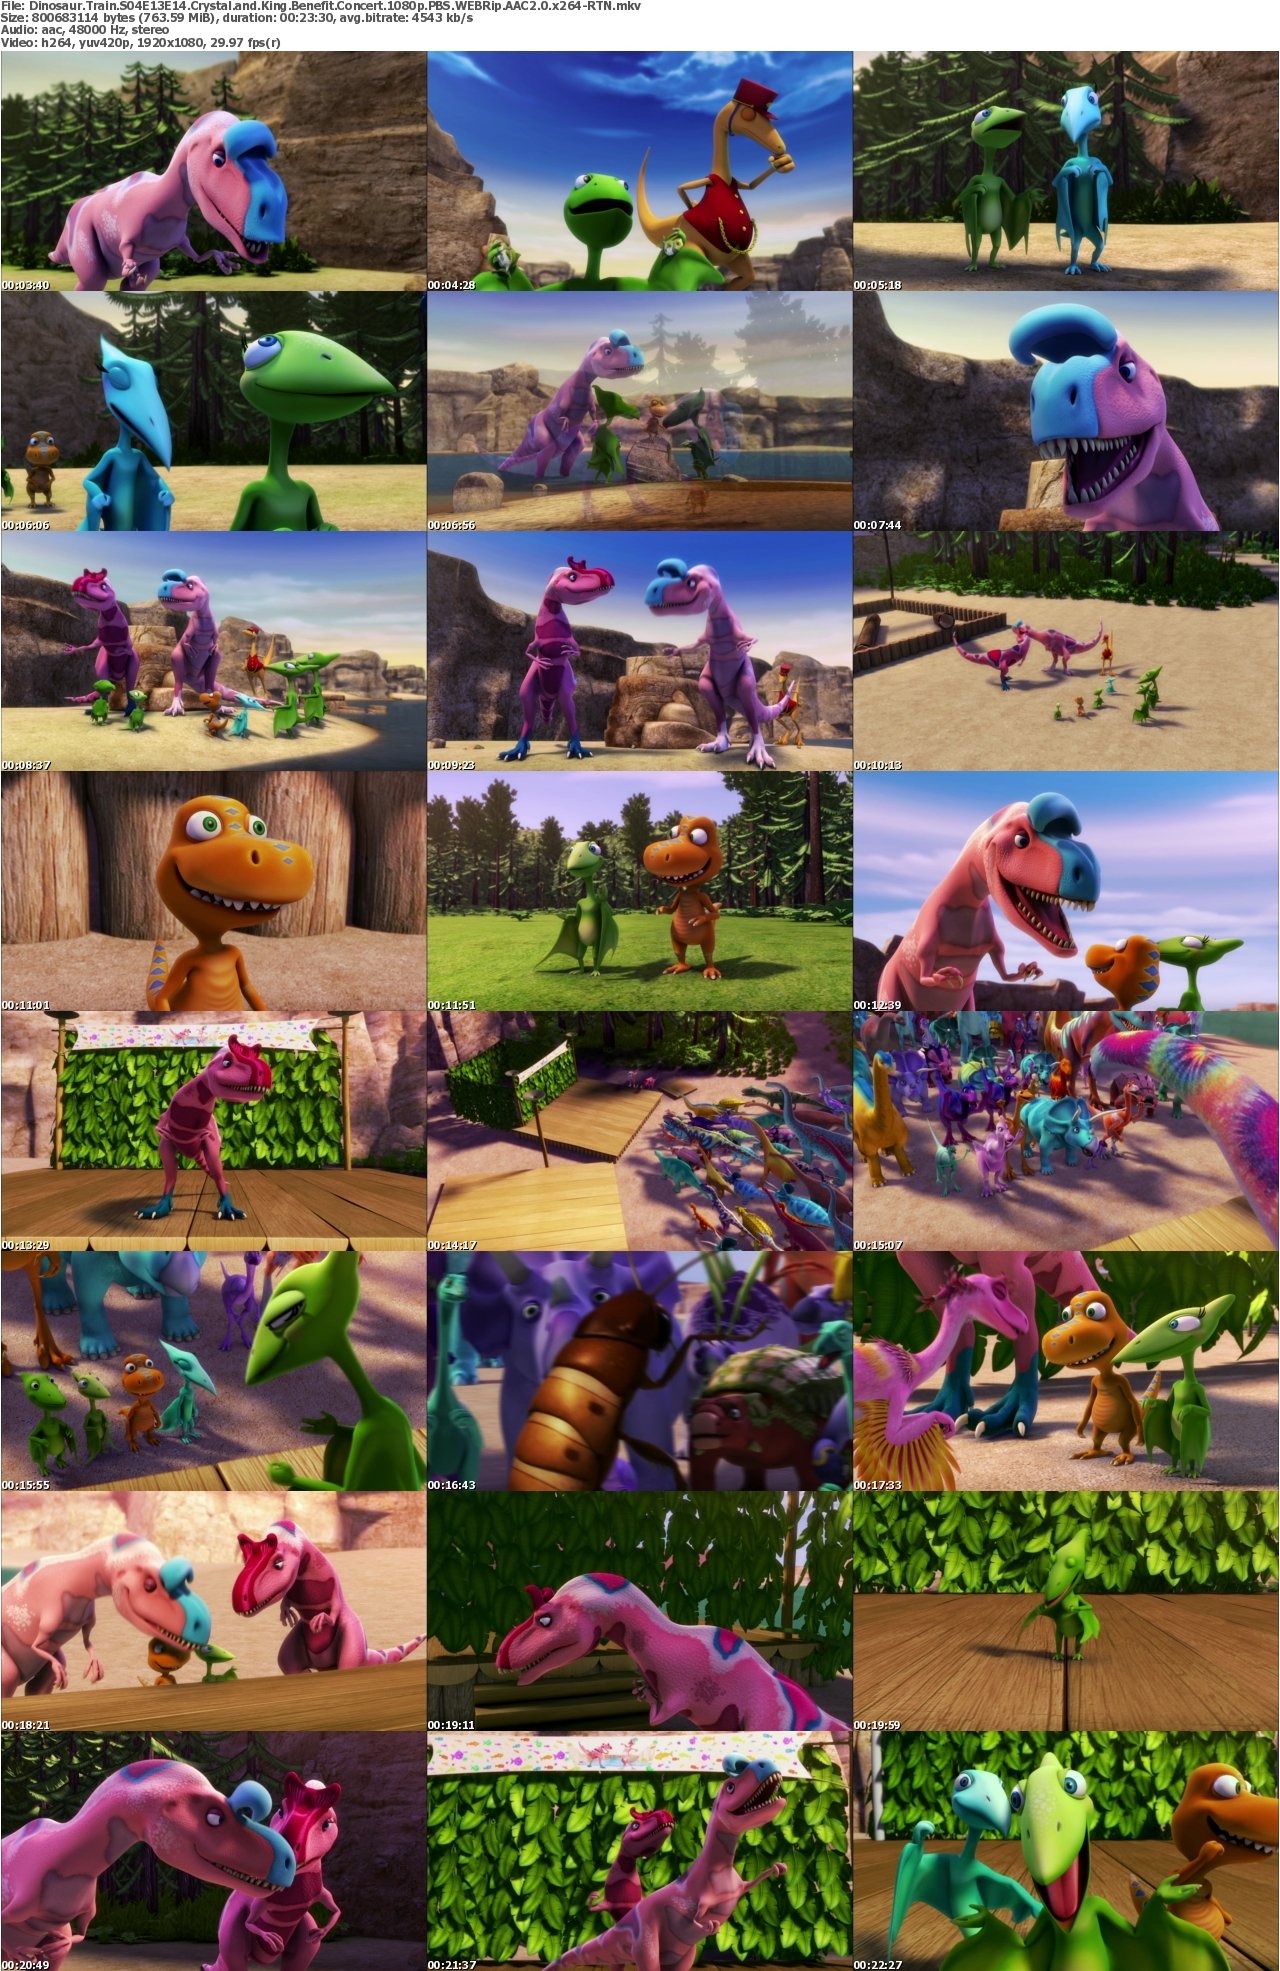 Download Dinosaur Train S04E13E14 Crystal And King Benefit Concert.